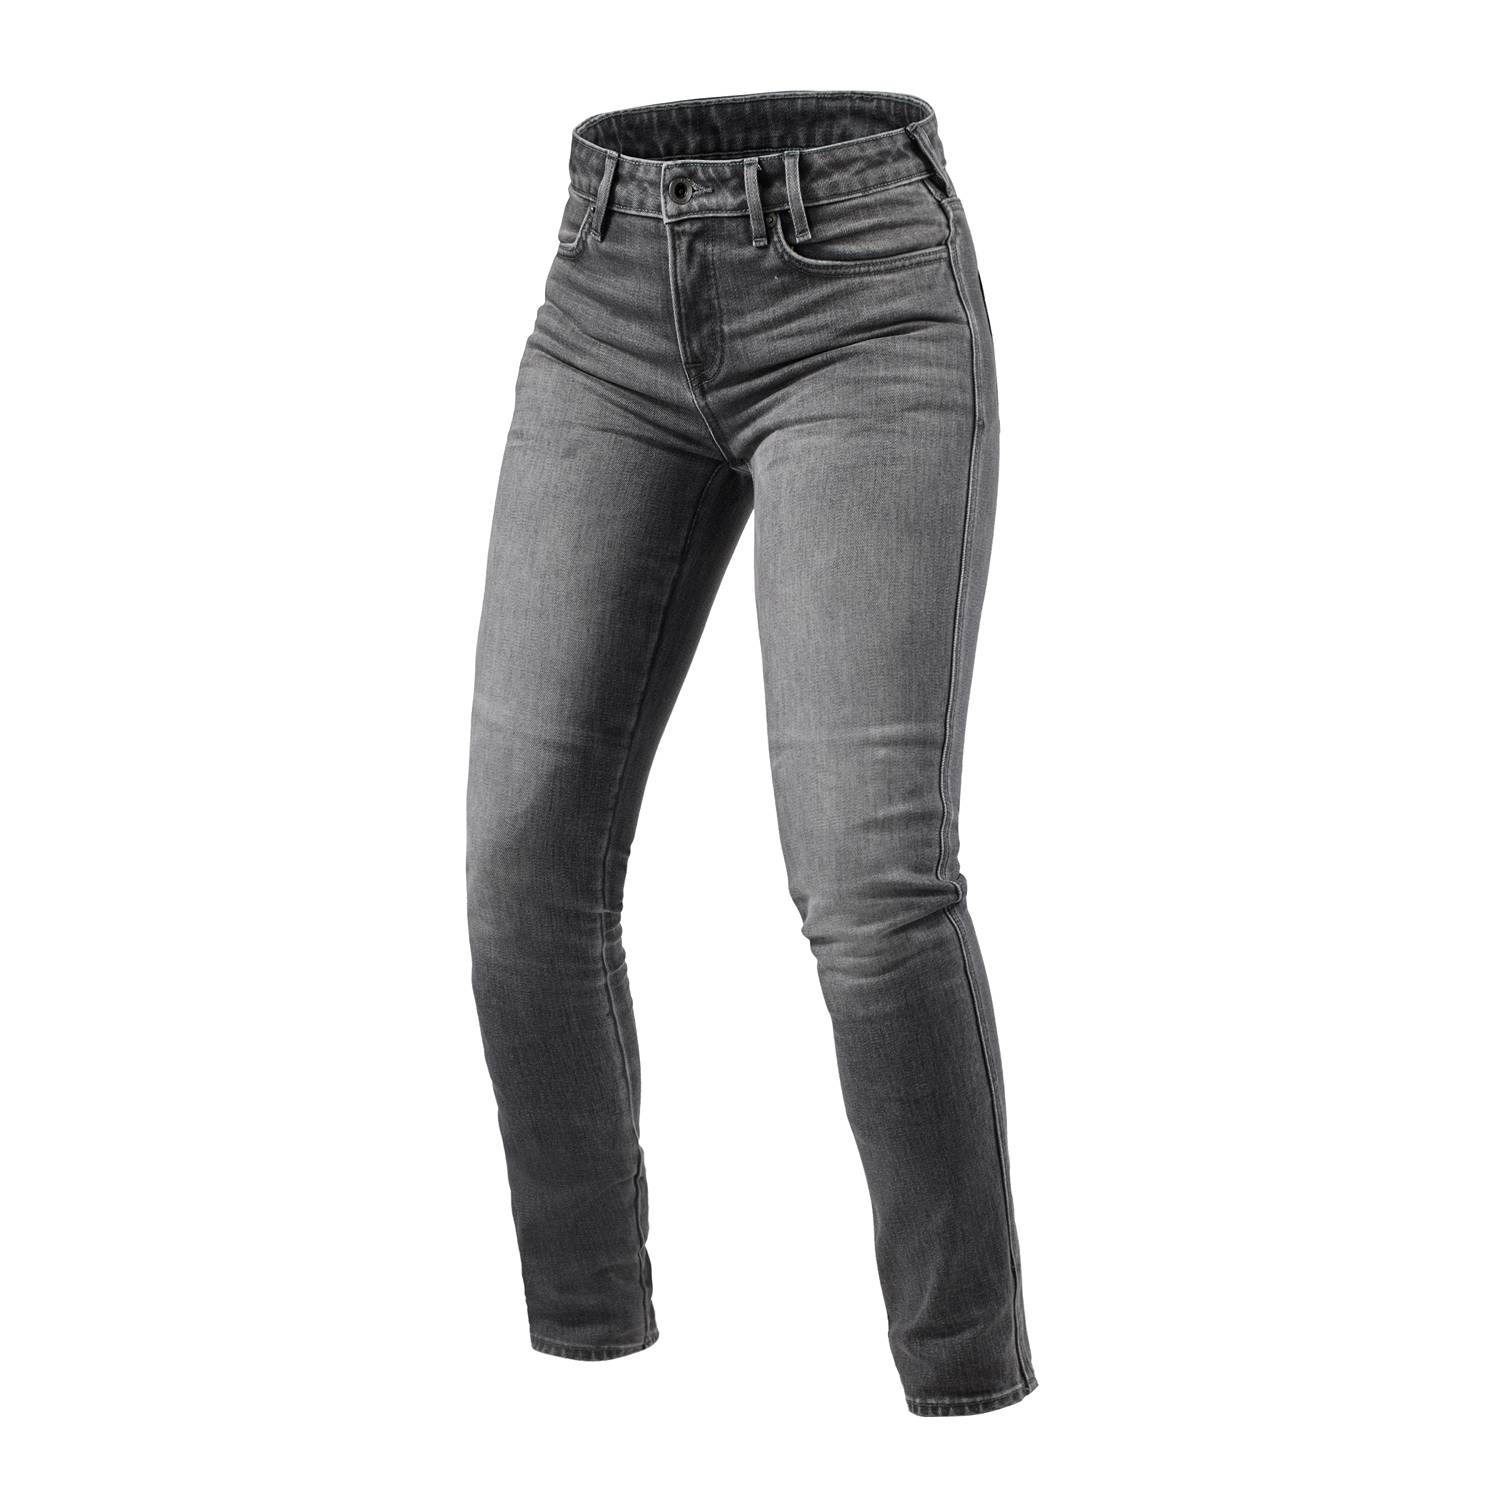 Image of EU REV'IT! Jeans Shelby 2 Ladies SK Medium Grey Stone L32 Taille L32/W26